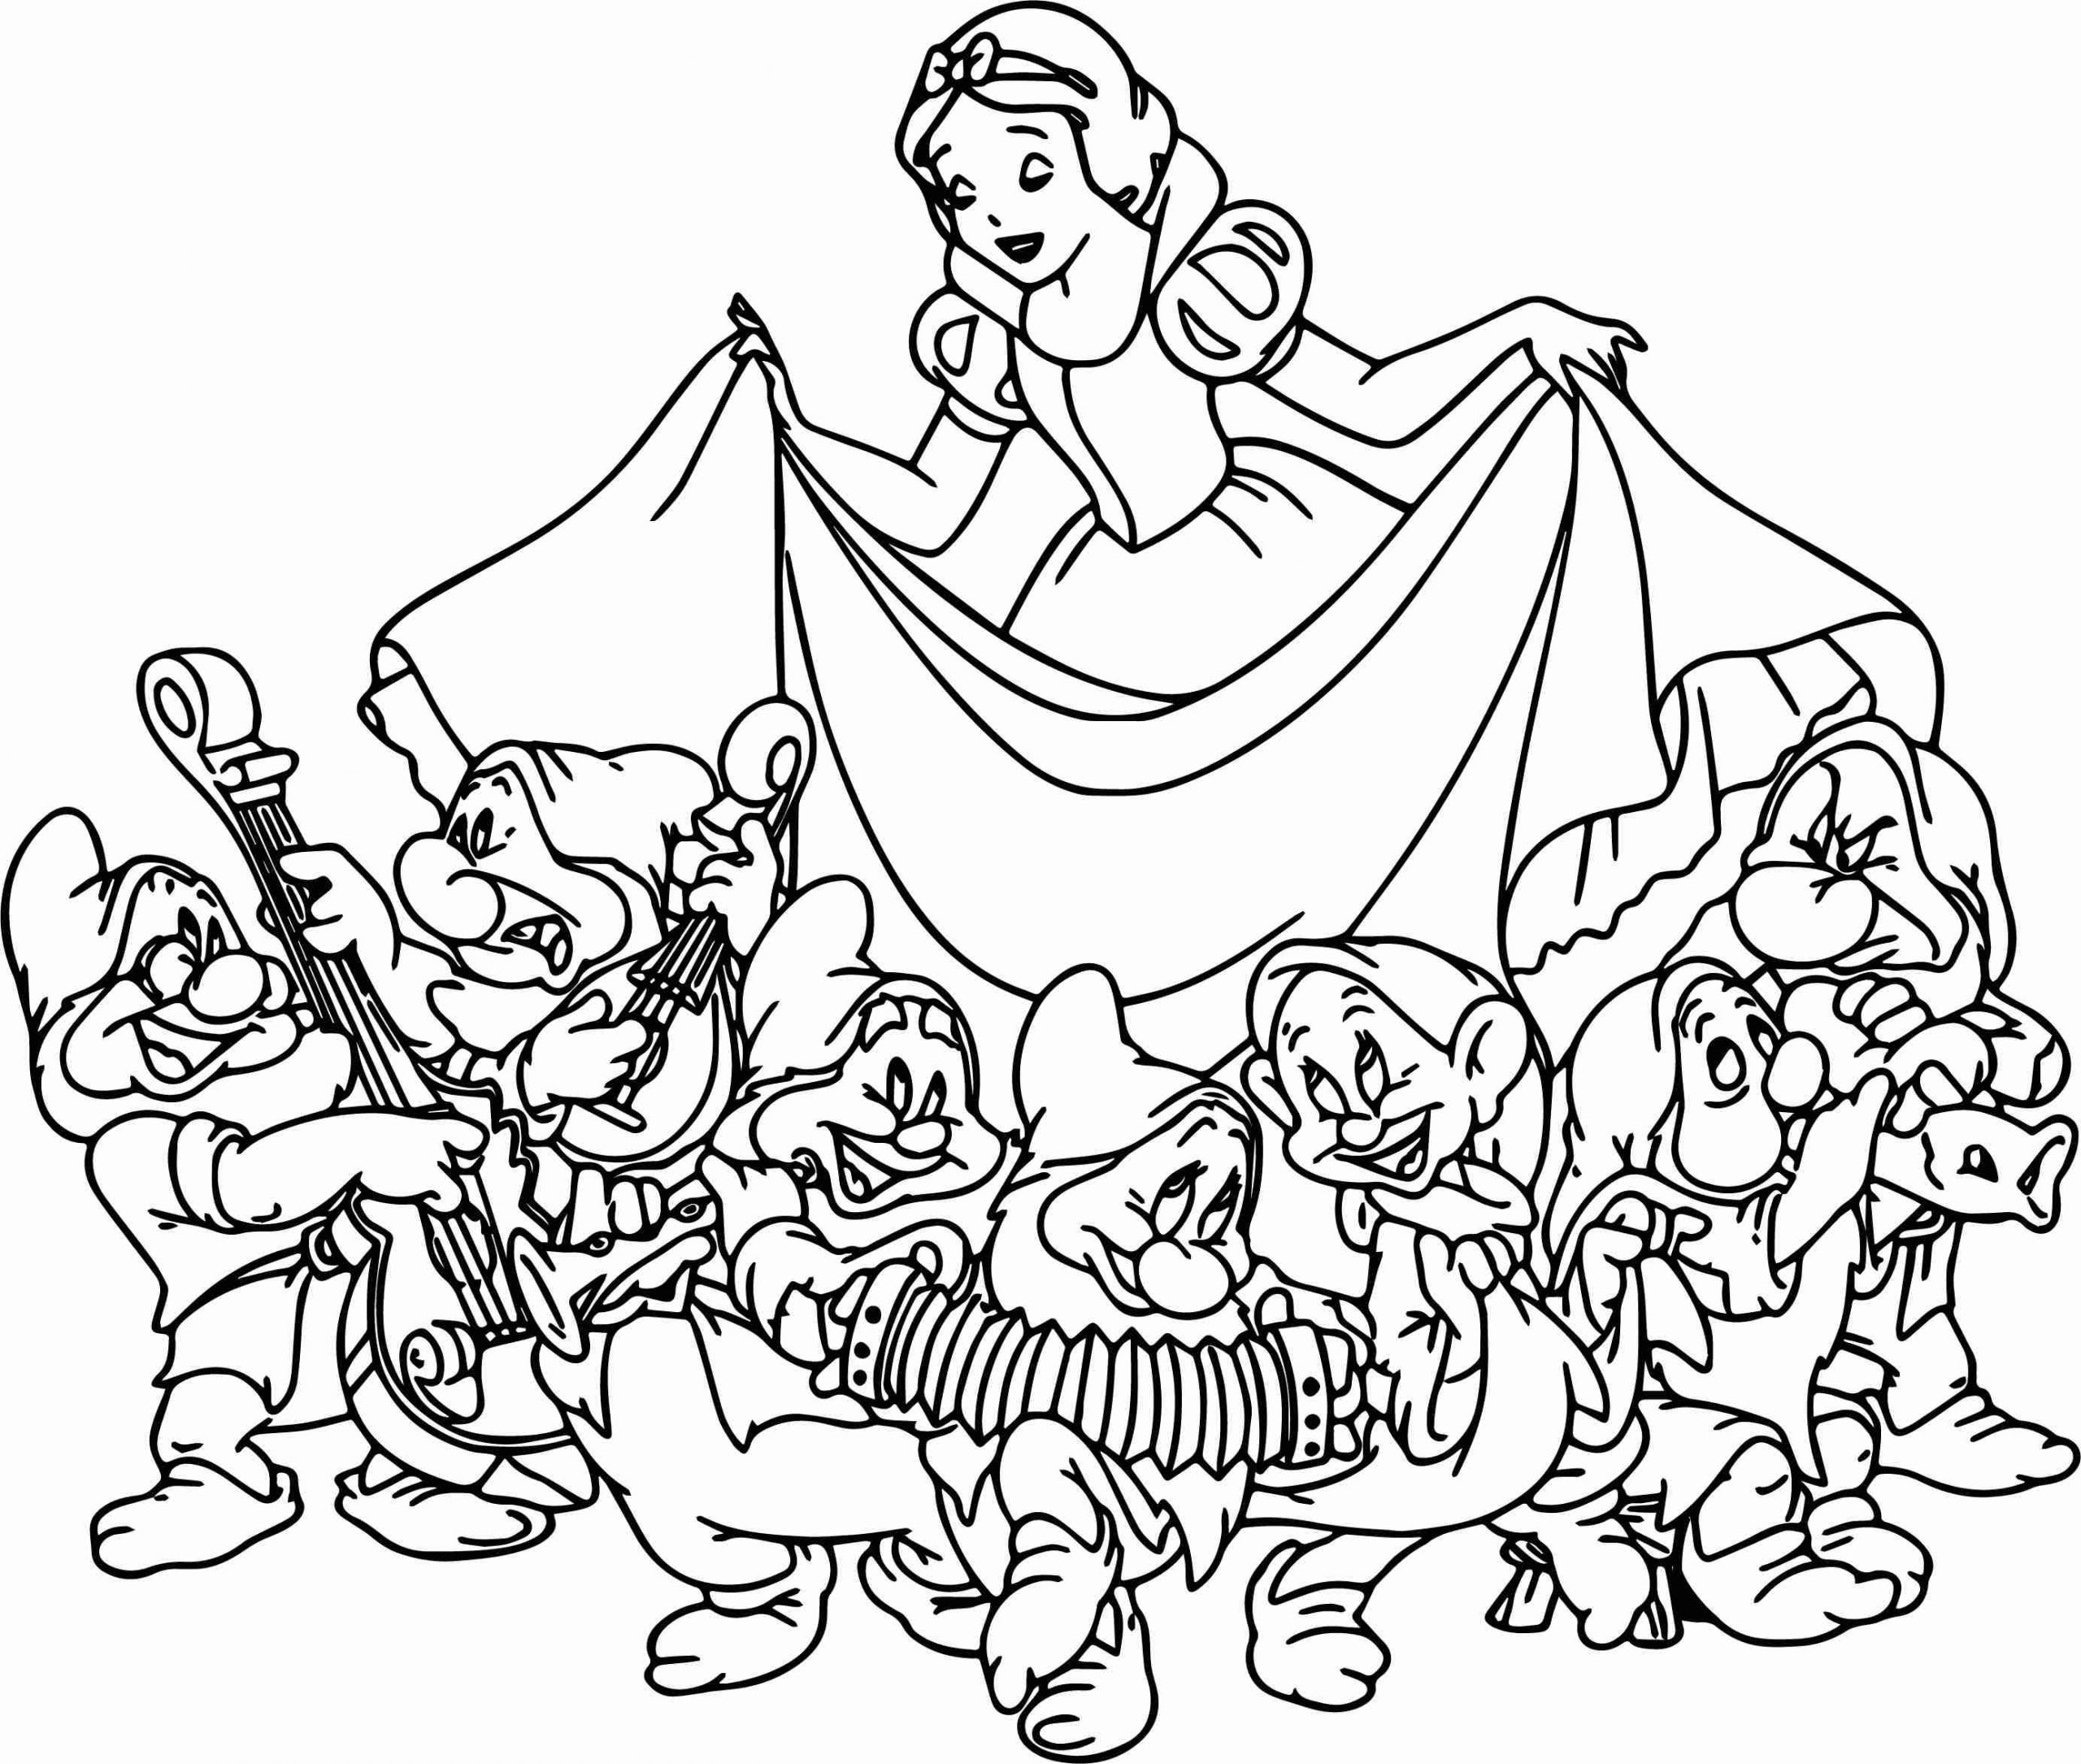 Snow white and the seven dwarfs coloring